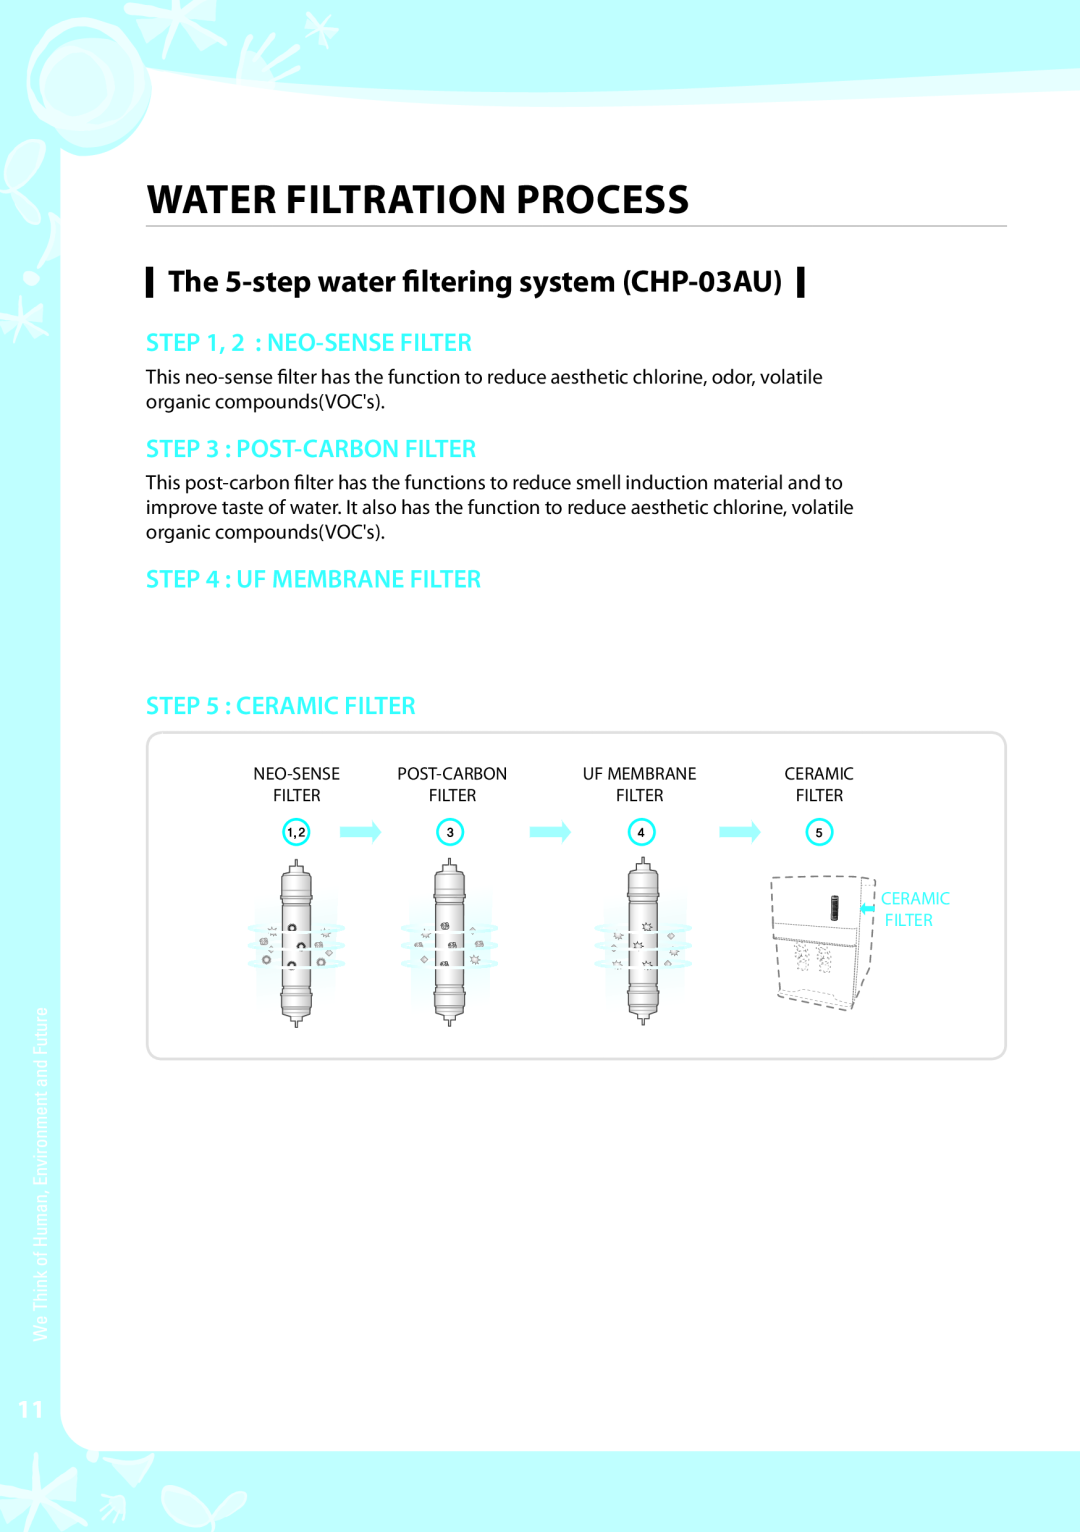 Coway CHP-03AL Post-Carbonfilter, Water Filtration Process, The 5-stepwater filtering system CHP-03AU, 2 : NEO-SENSEFILTER 